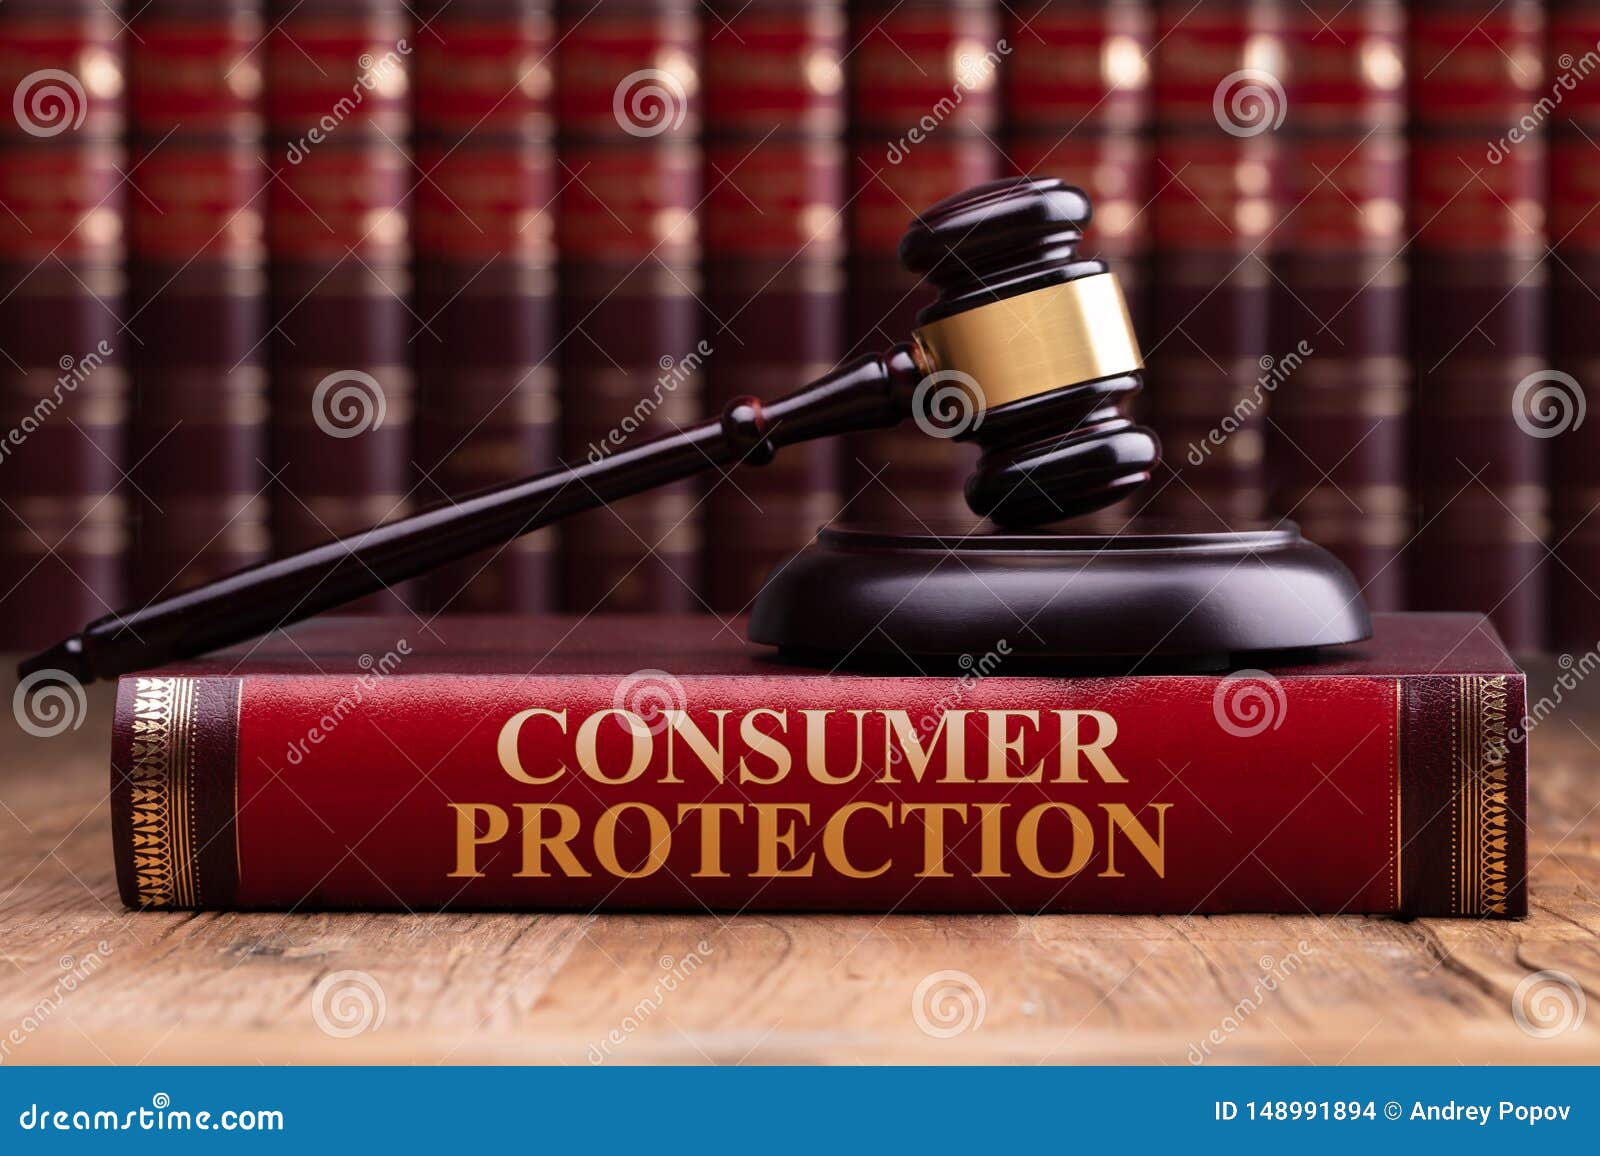 wooden gavel and soundboard on consumer protection law book